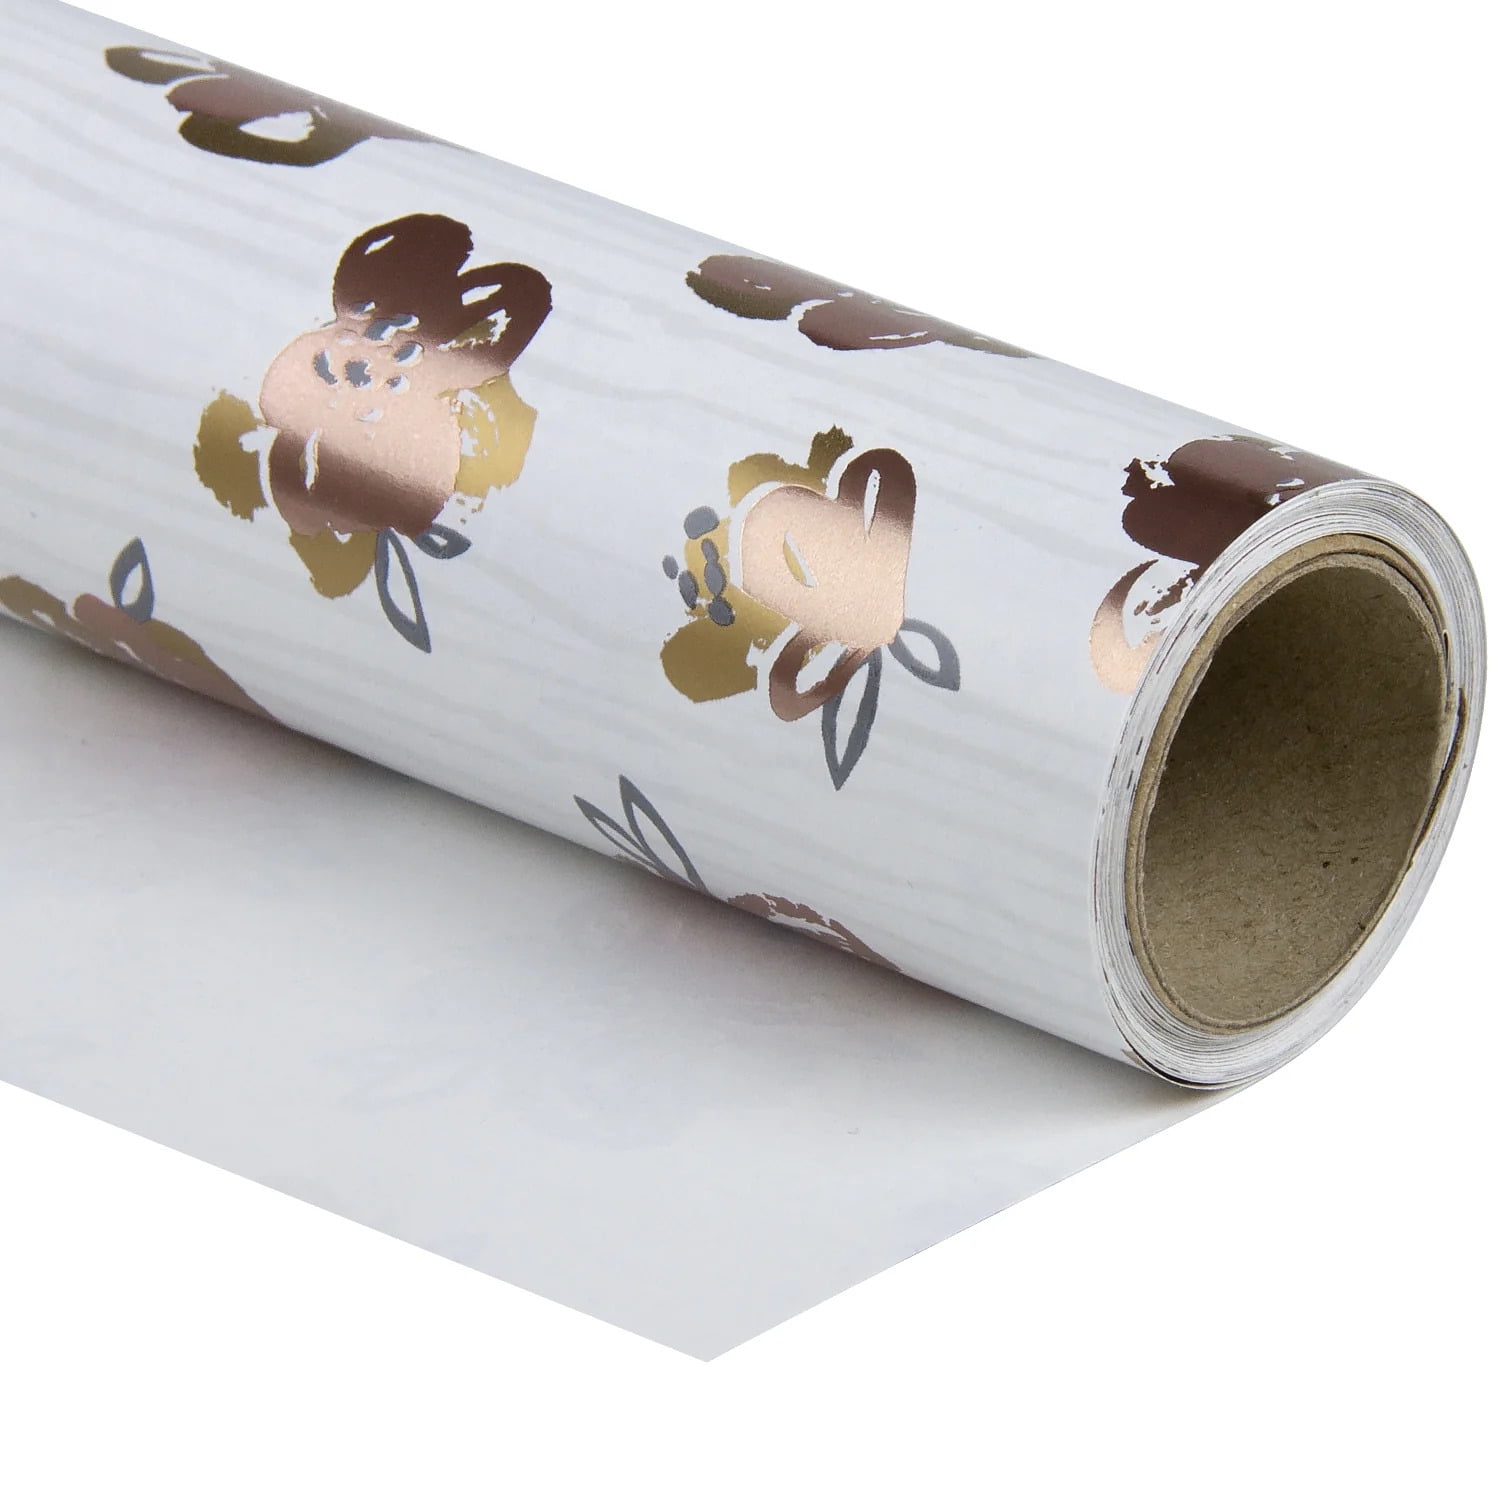 WRAPAHOLIC Wrapping Paper Roll - Rose Gold Floral, Dandelion, Lines and  Polka Dots for Wedding, Birthday, Baby Shower - 4 Rolls - 30 inch X 120  inch